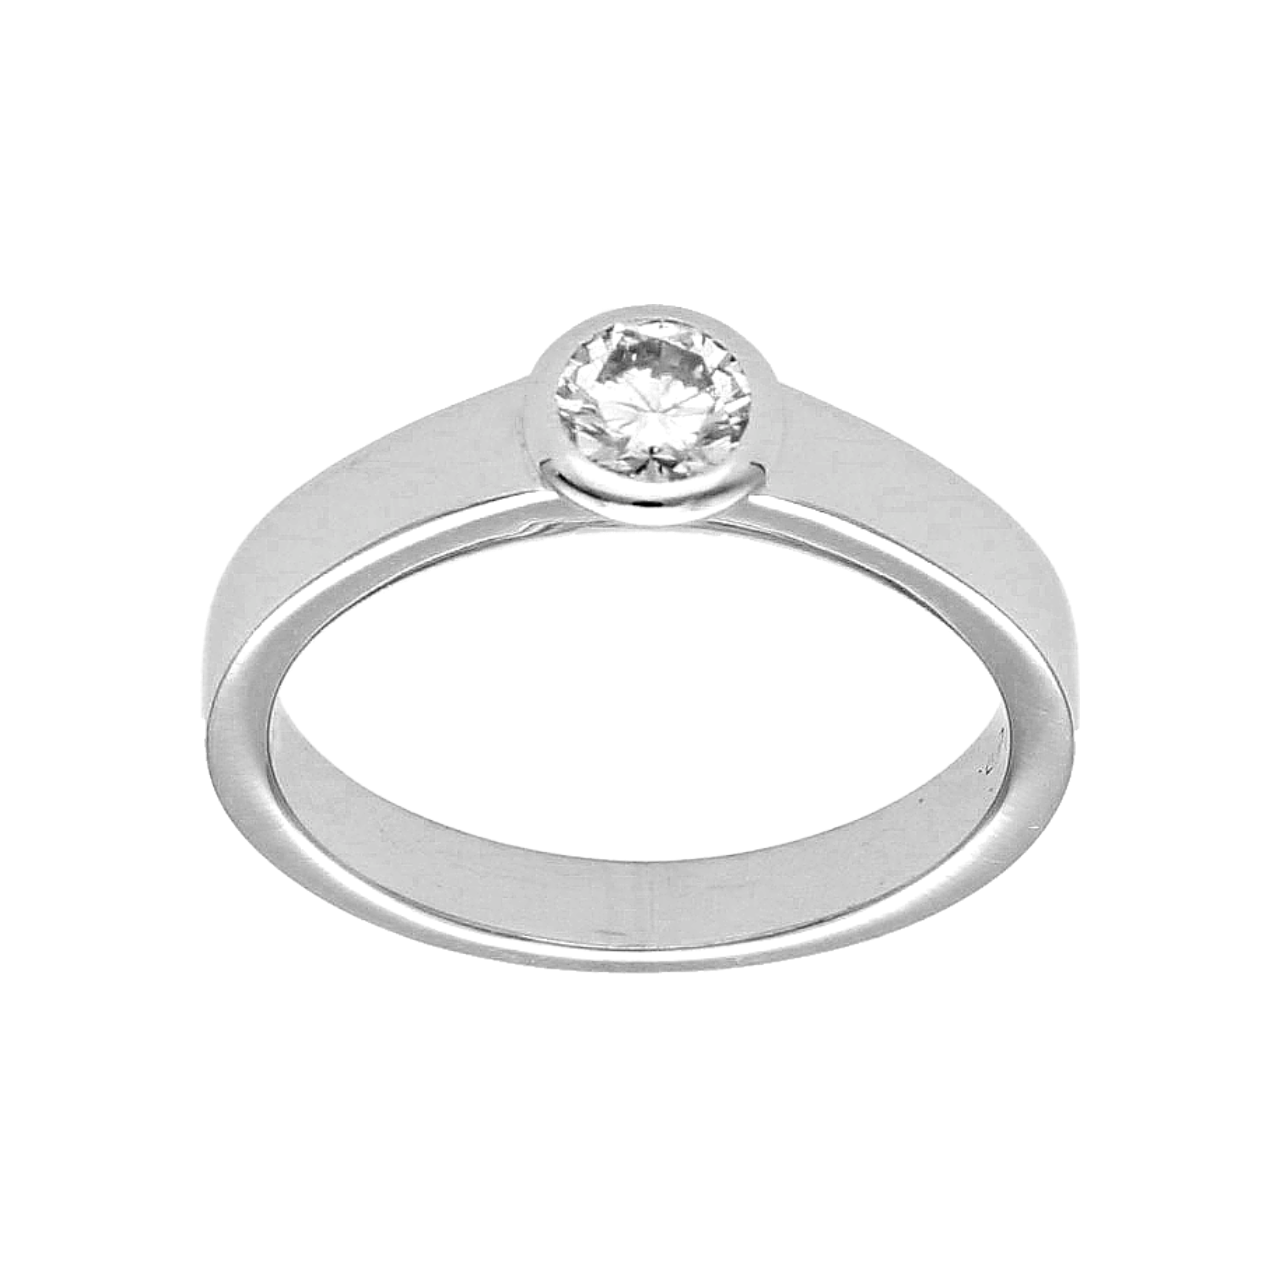 White gold solitary ring with diamond 0.20 ct VS1/F